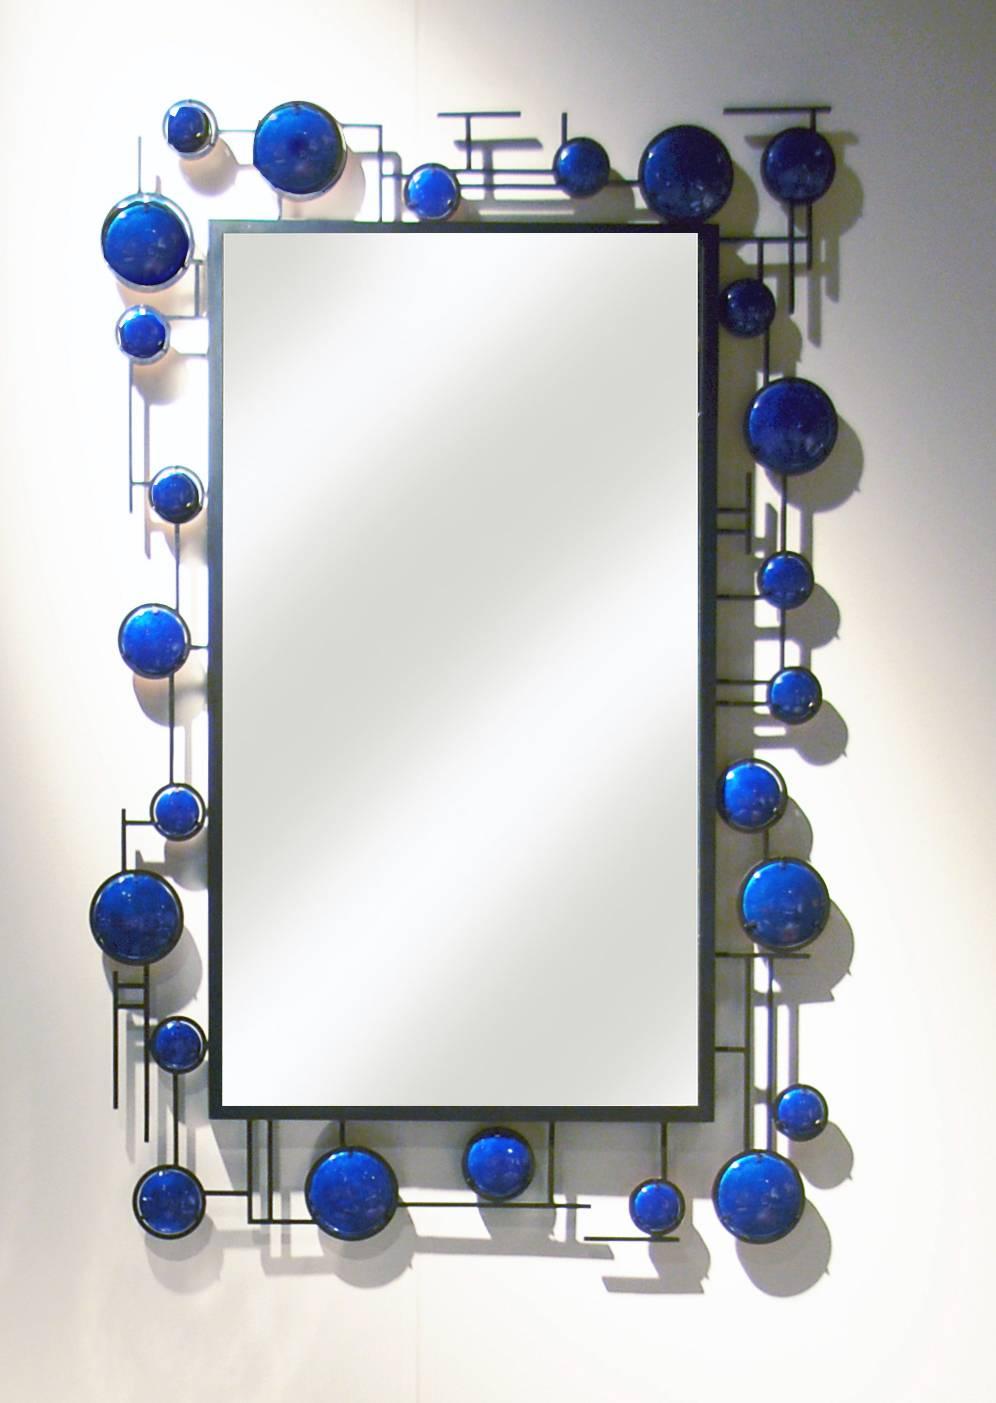 This Christophe Côme blue enamel mirror is made from copper and blue enamel in 2016. The piece can be installed horizontally or vertically and we can take custom mirror orders. 

Côme works in Paris, France. Raised in an artistic family, his uncle